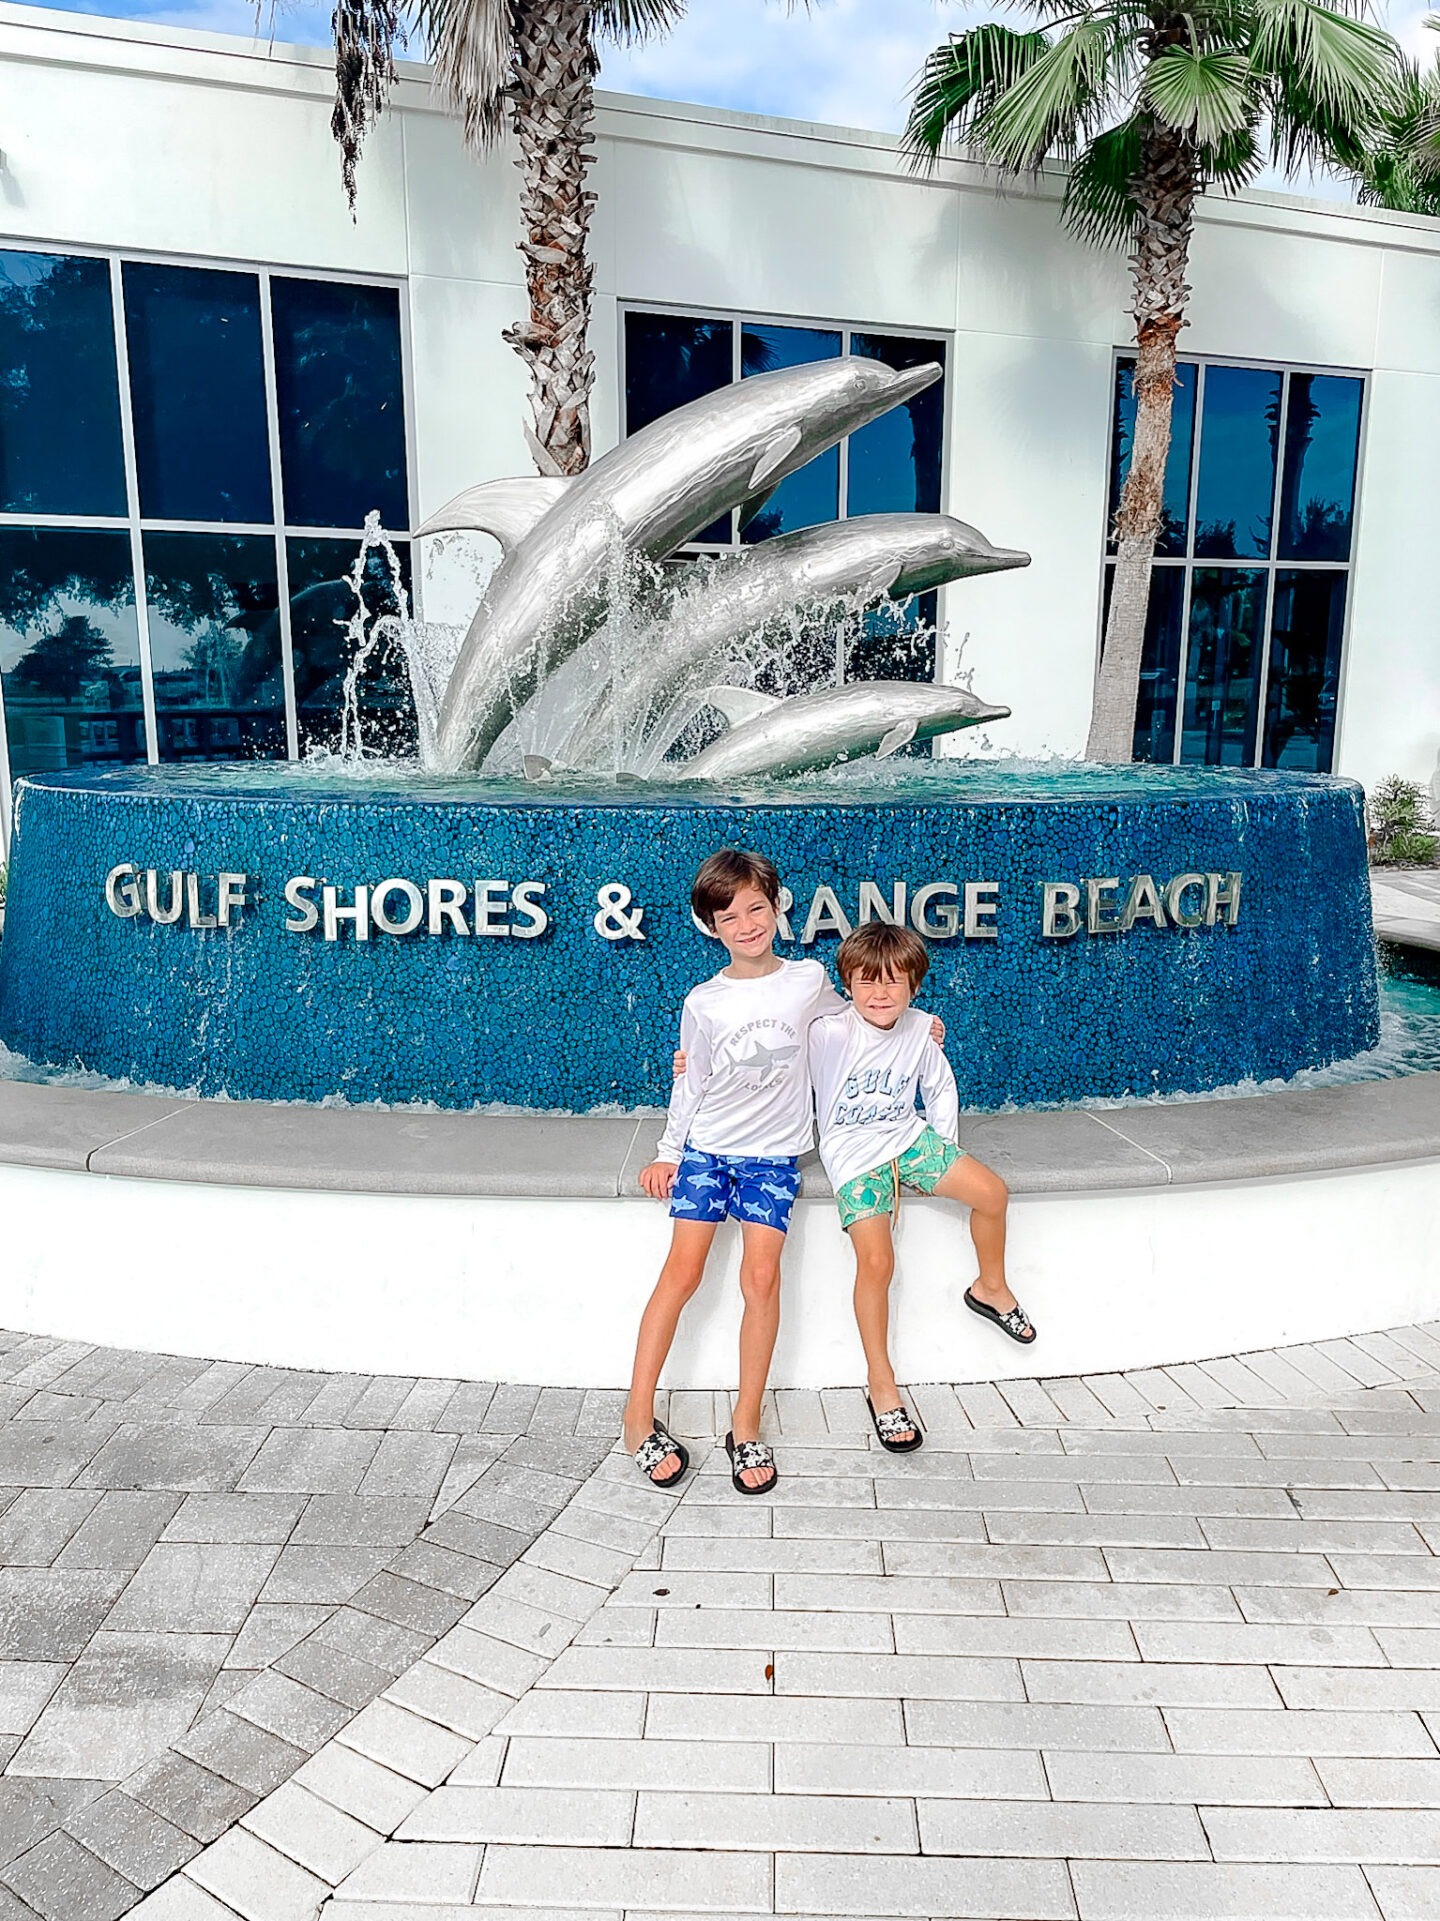 Christian Birmingham podcaster & health coach, Heather Brown, shares how to Family Reset with a vacation guide to Gulf Shores Alabama.